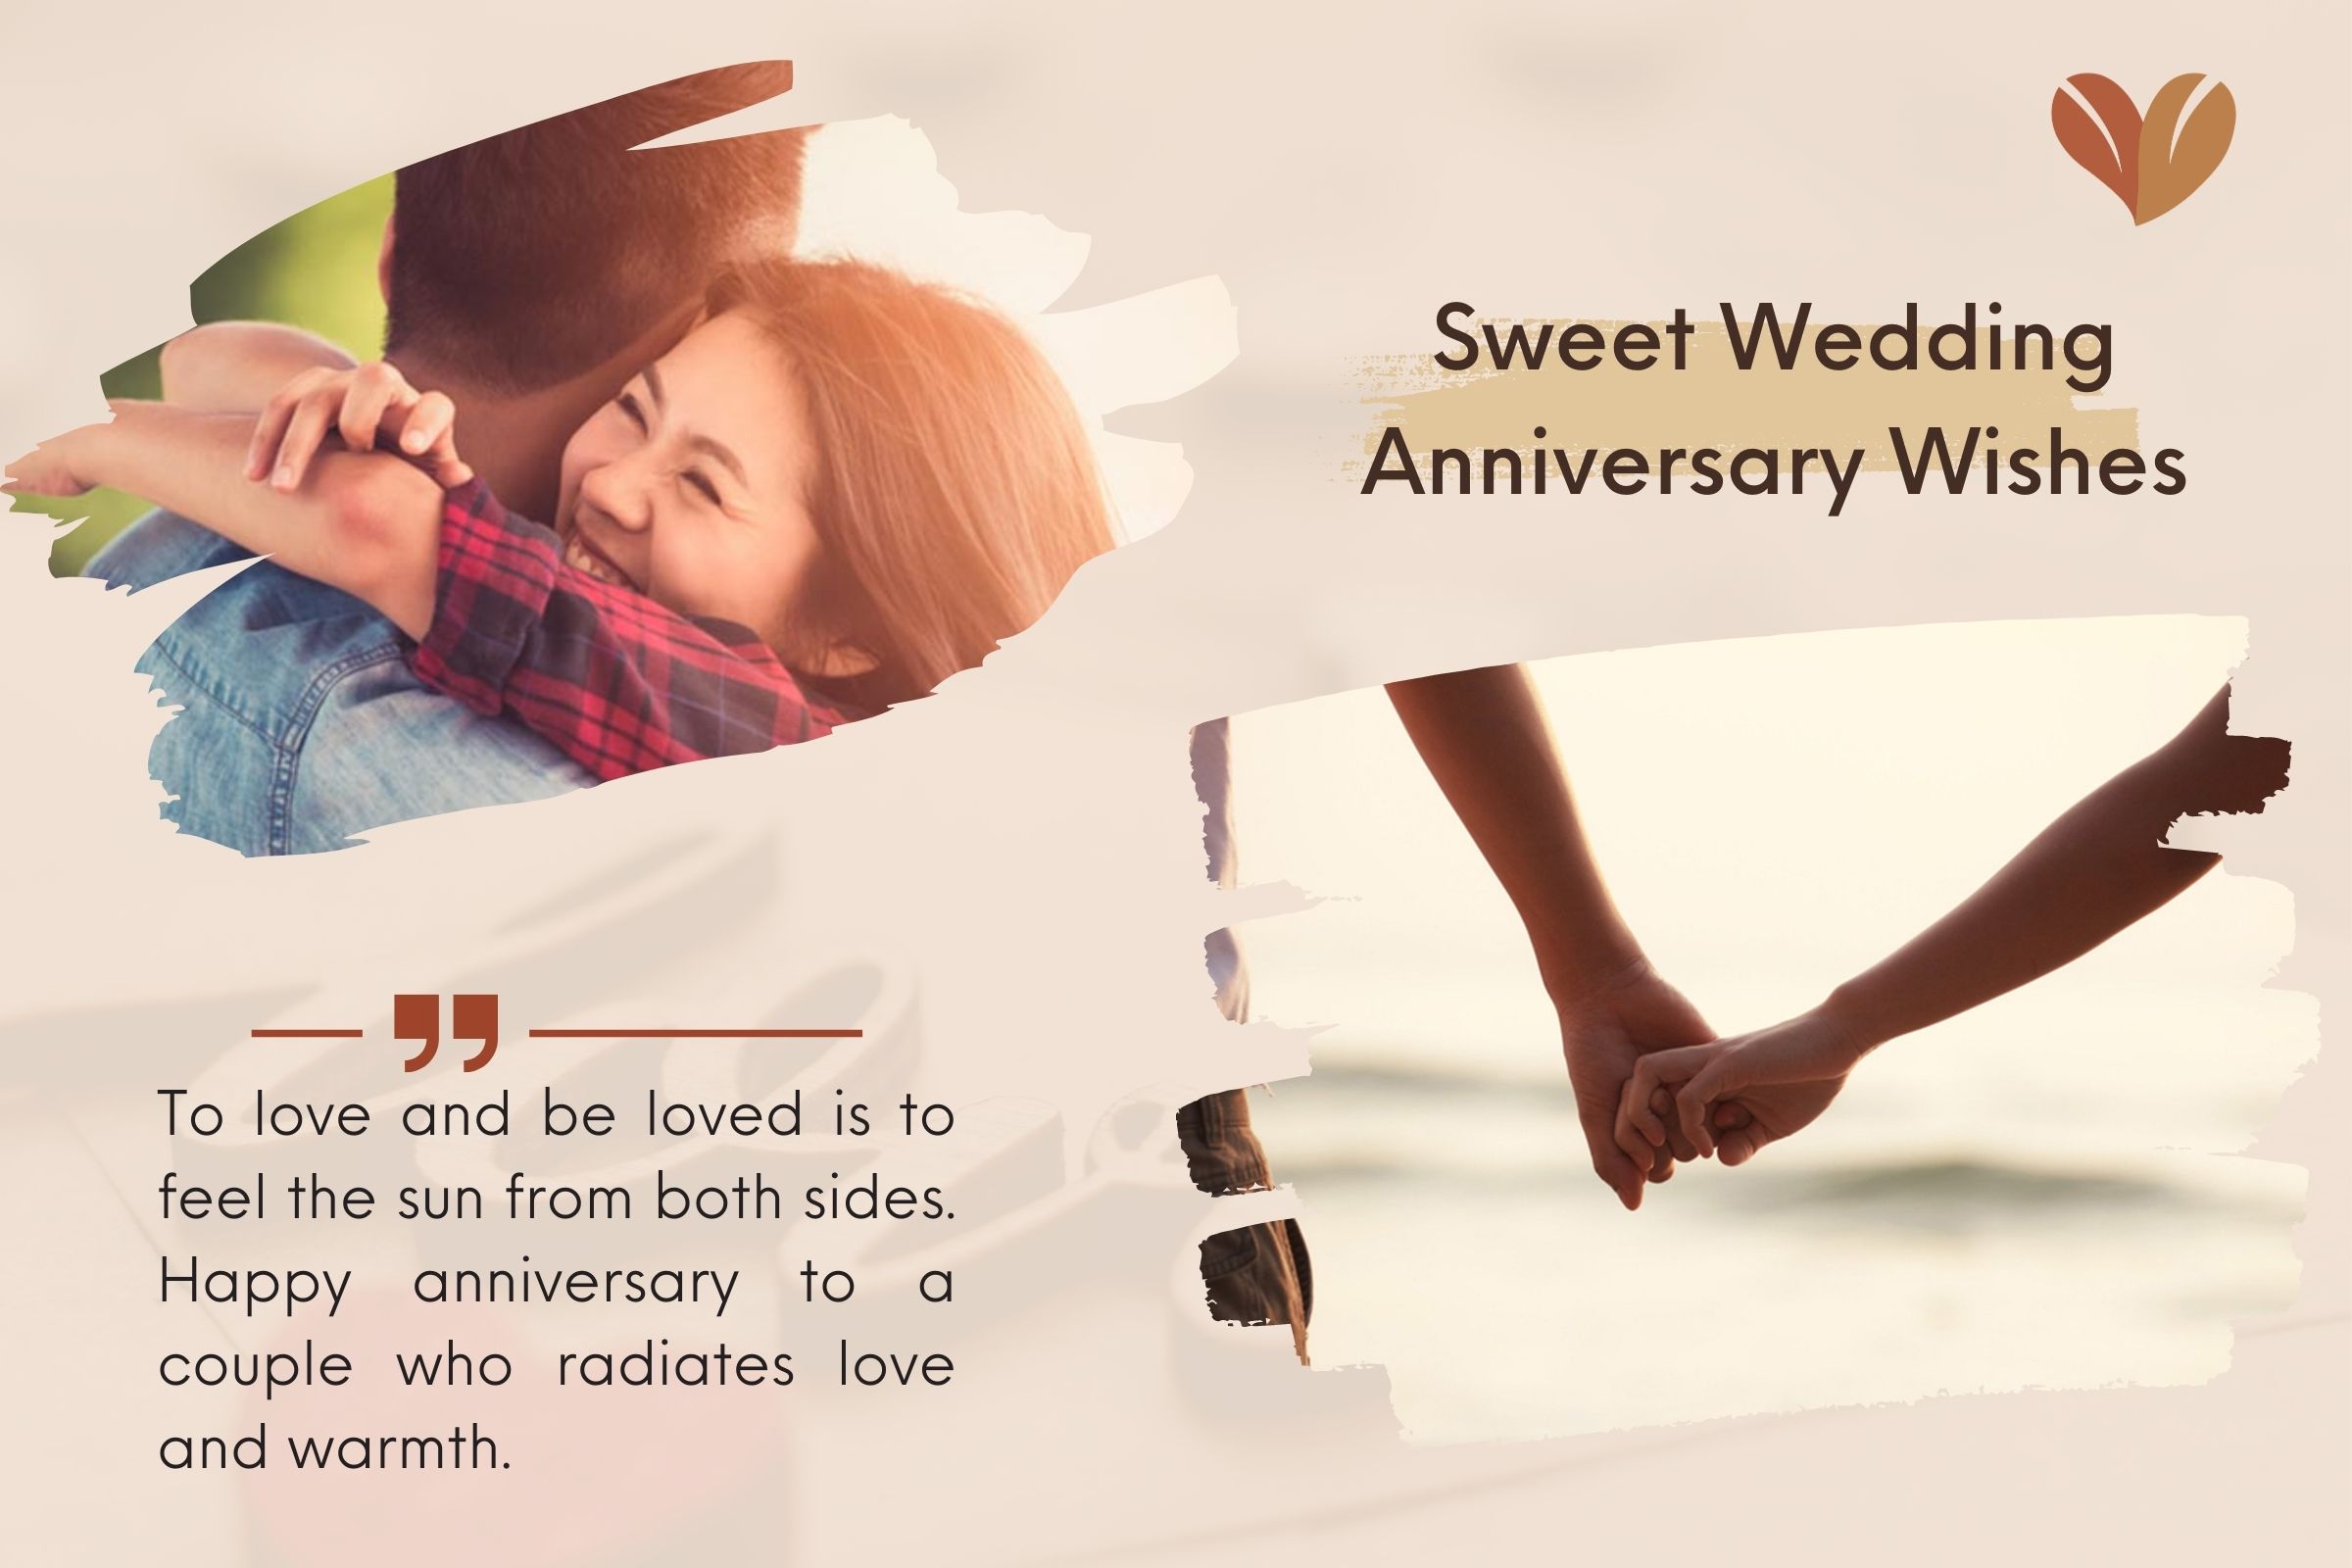 Sweet wedding anniversary wishes for couple